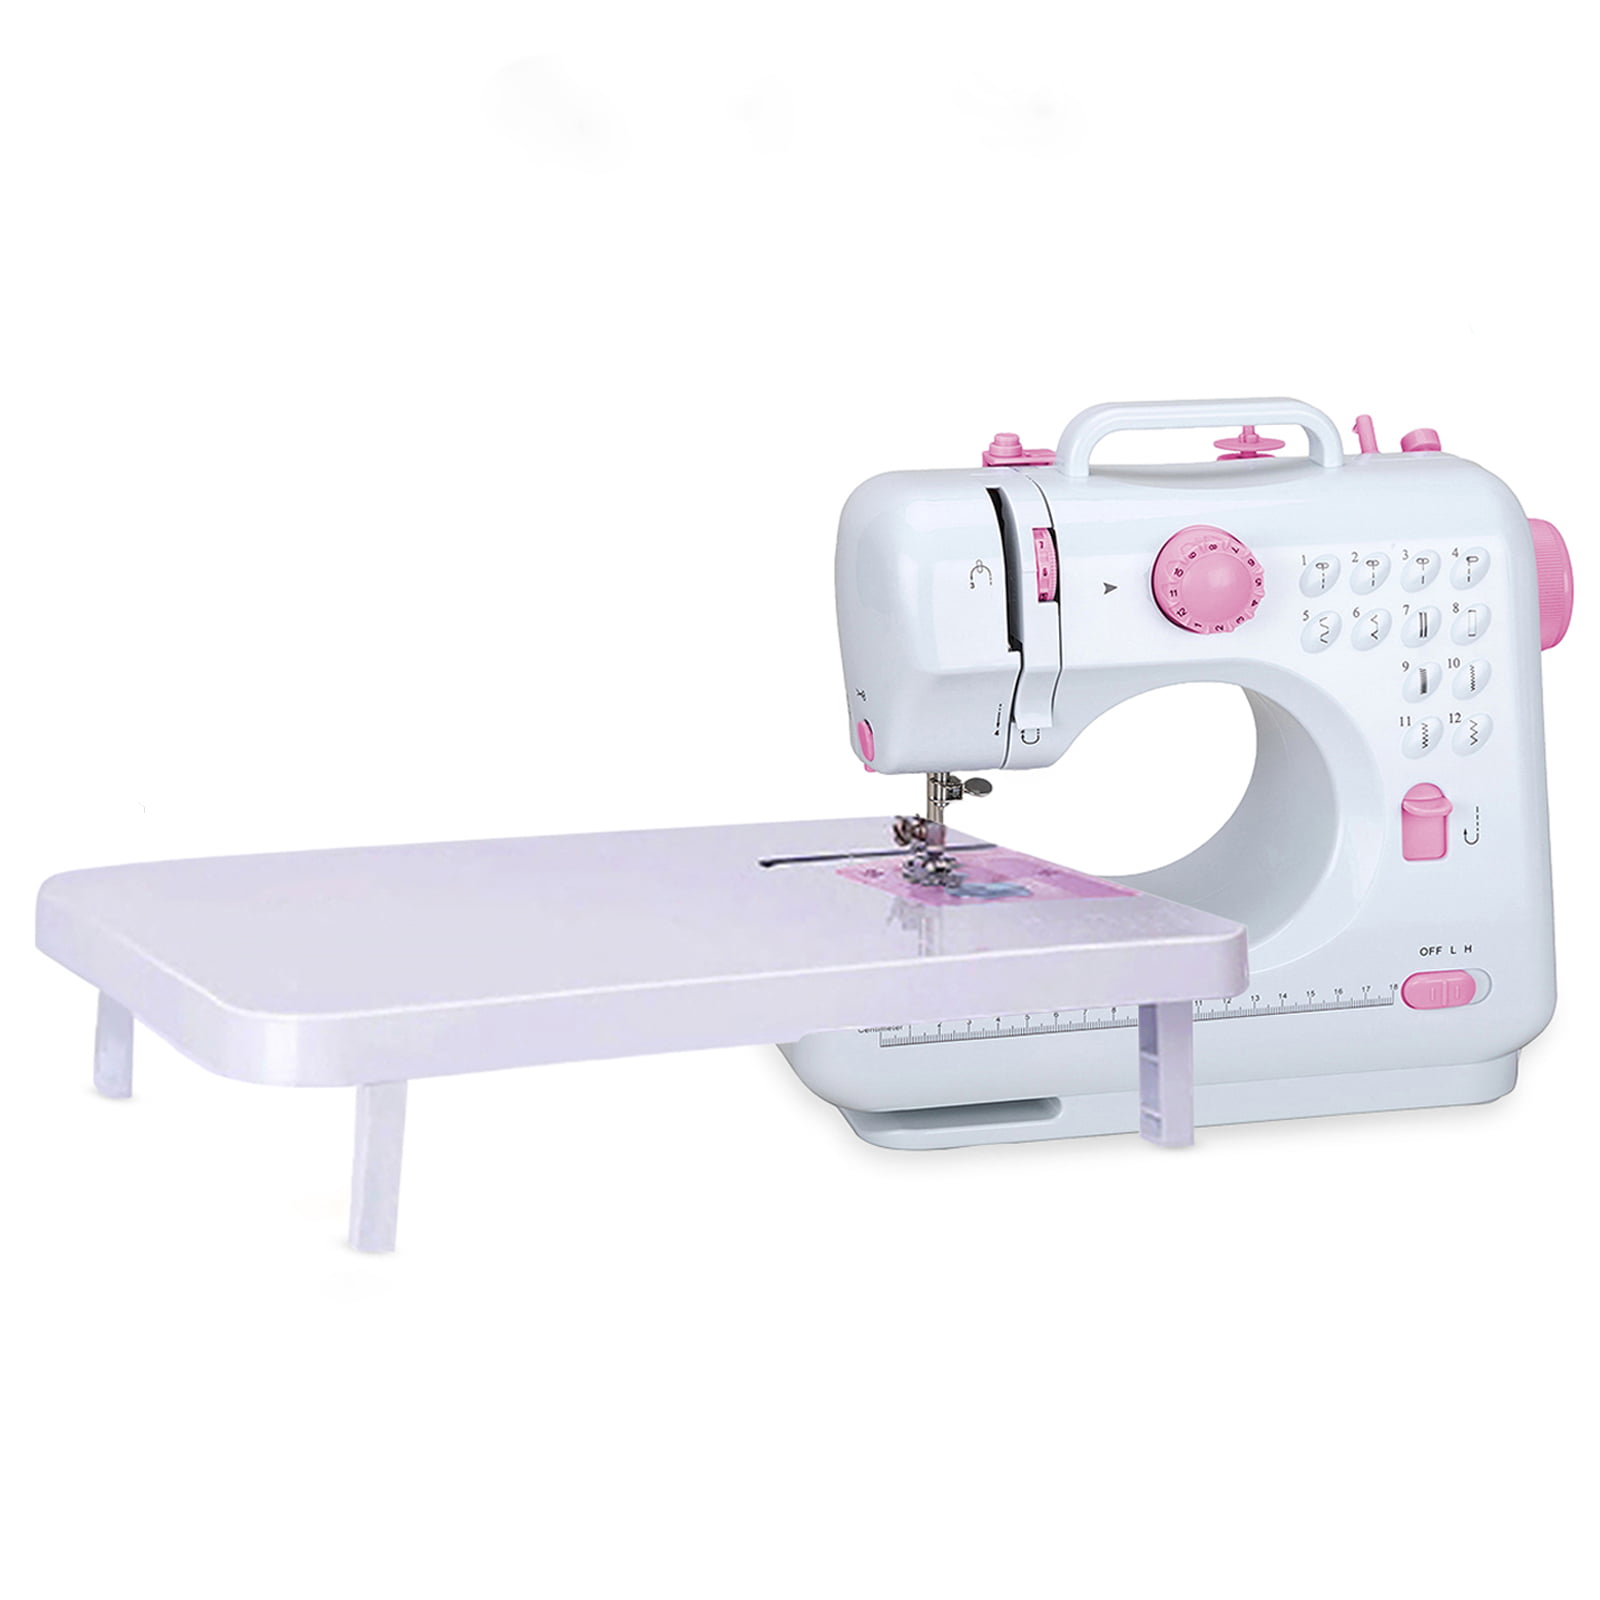 VIFERR Portable Sewing Machine, Mini Sewing Machines 12 Built-in Stitches  with Extension Table and Foot Pedal for Beginners&Kids(Purple)